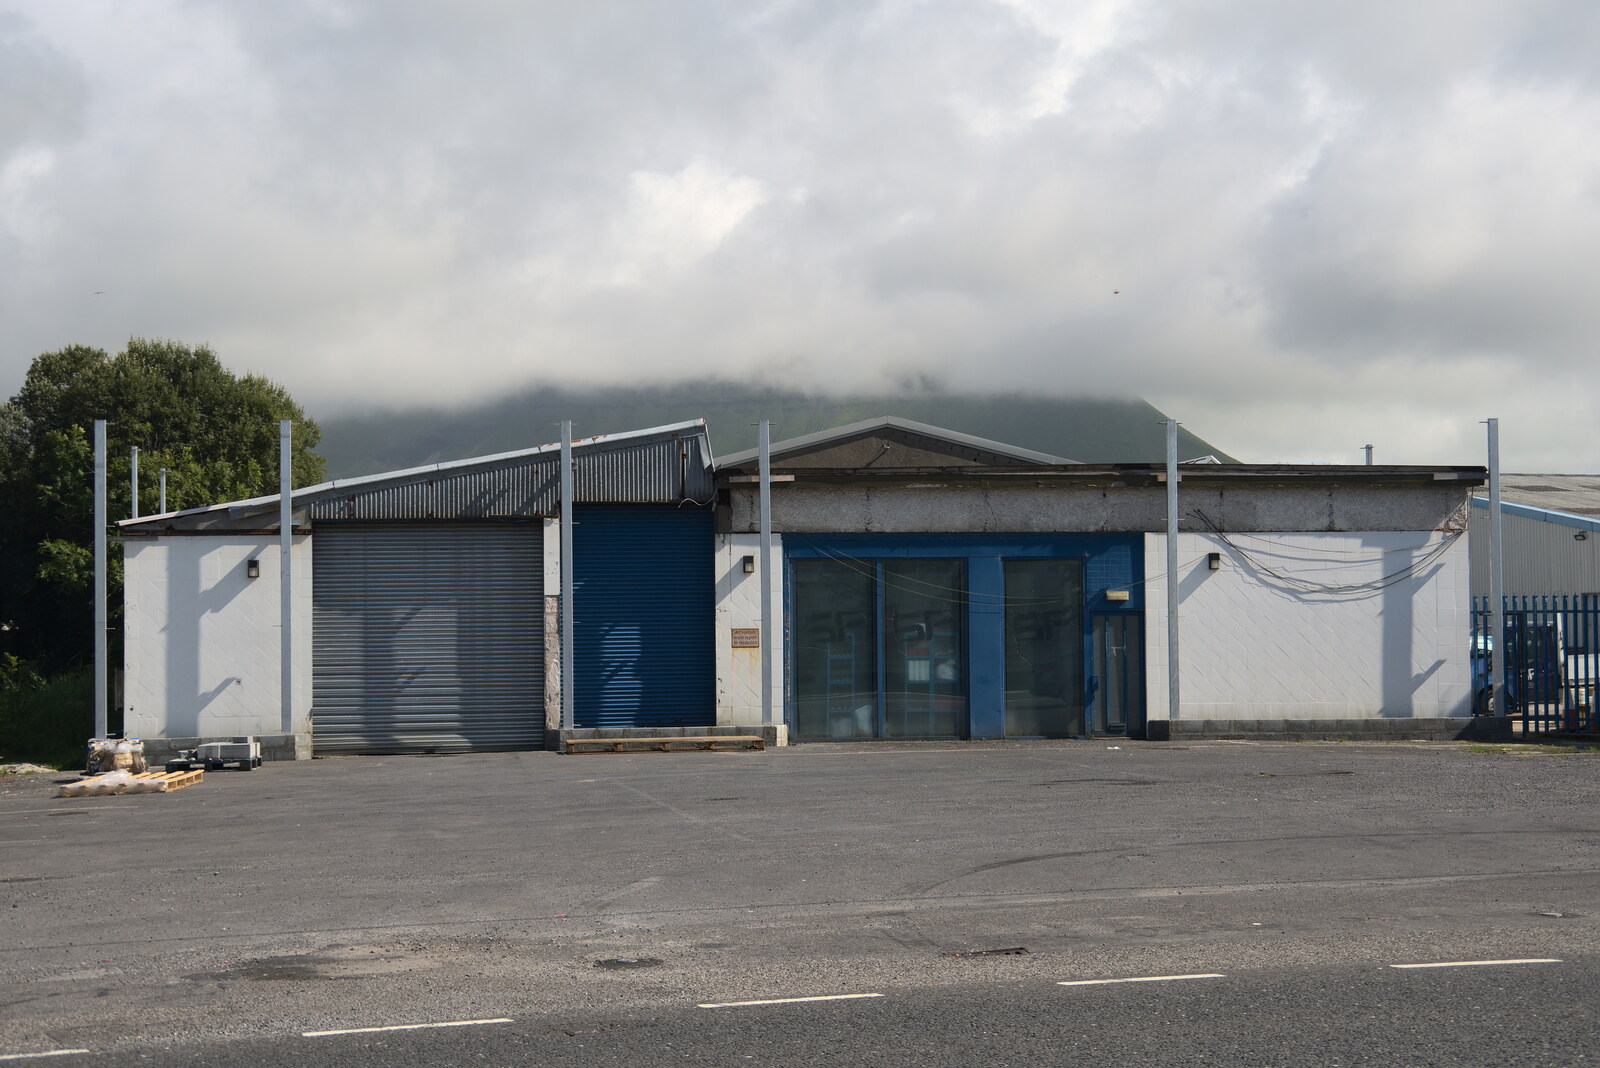 Pints of Guinness and Streedagh Beach, Grange and Sligo, Ireland - 9th August 2021: A derelict building over the road from SuperValu